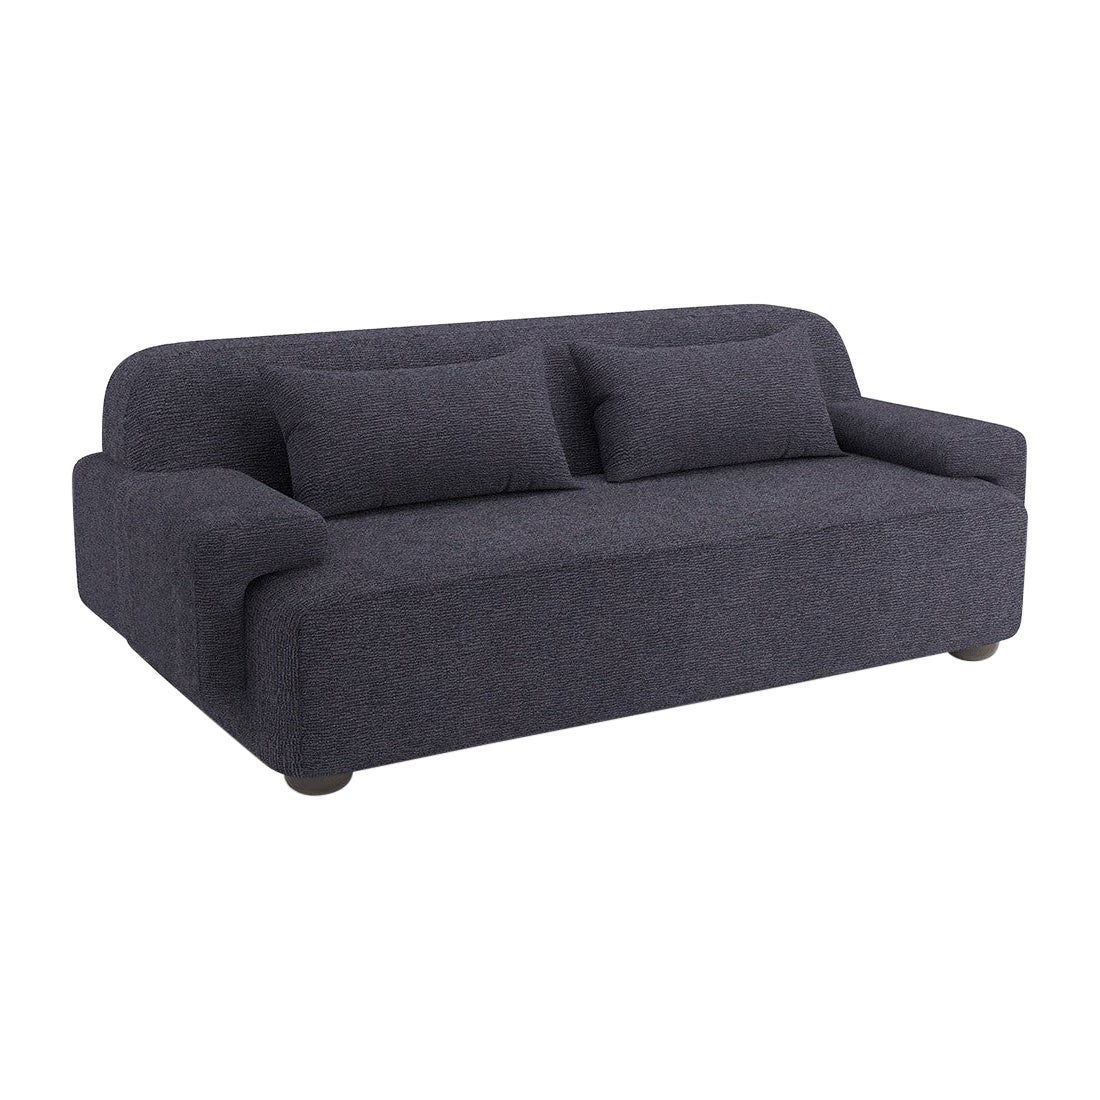 Popus Editions Lena 3 Seater Sofa in Anthracite Megeve Fabric with Knit Effect